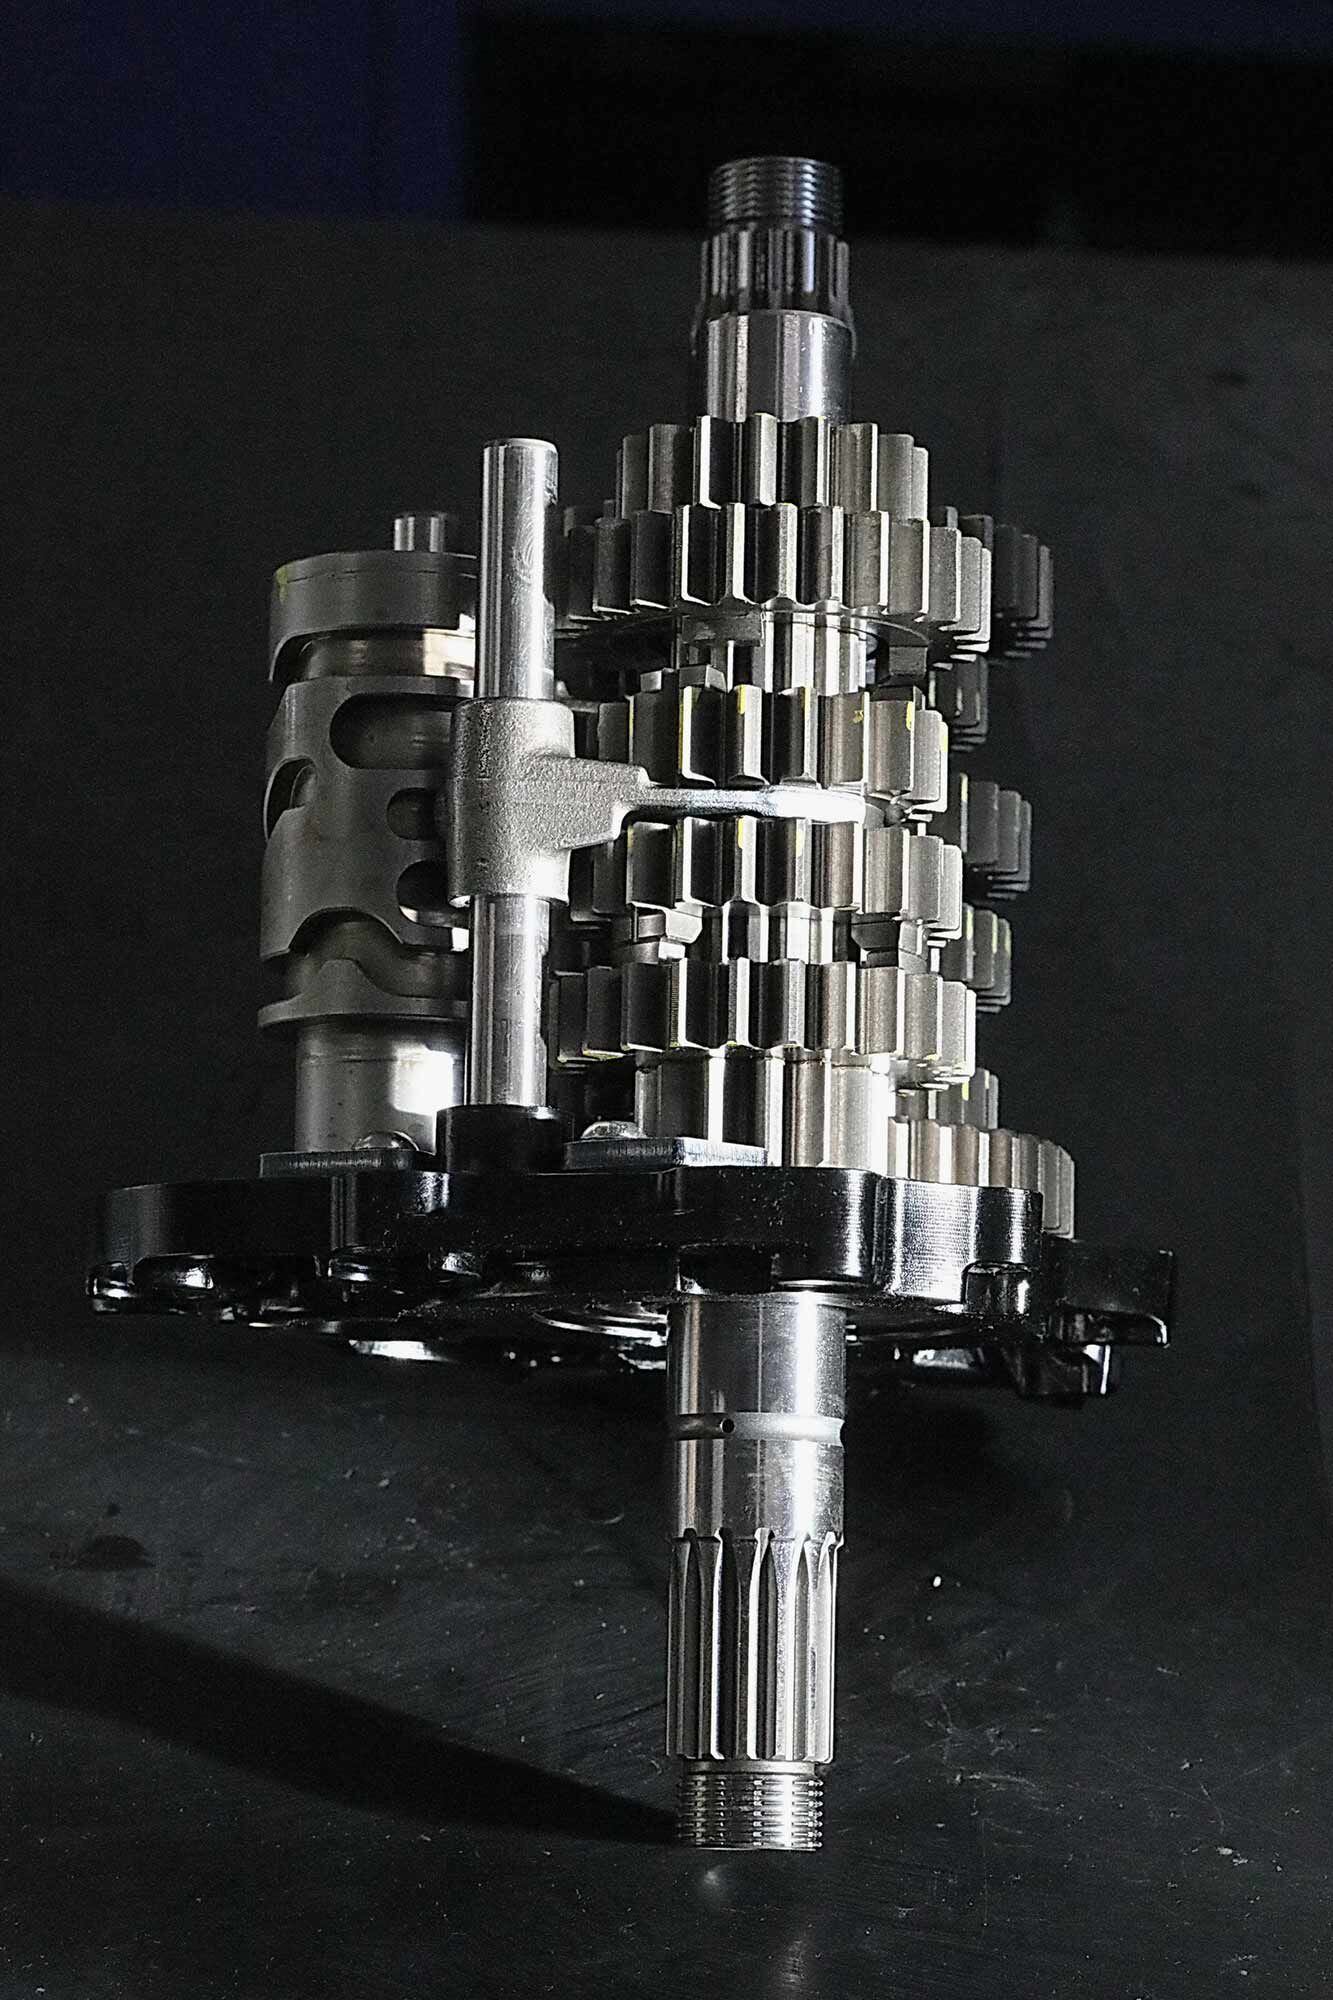 The six-speed gearbox is all new and both stronger and smoother. Straight-cut advanced-module gears are expected to be quieter and absorb less power than Gleason-type helical-cut gears.